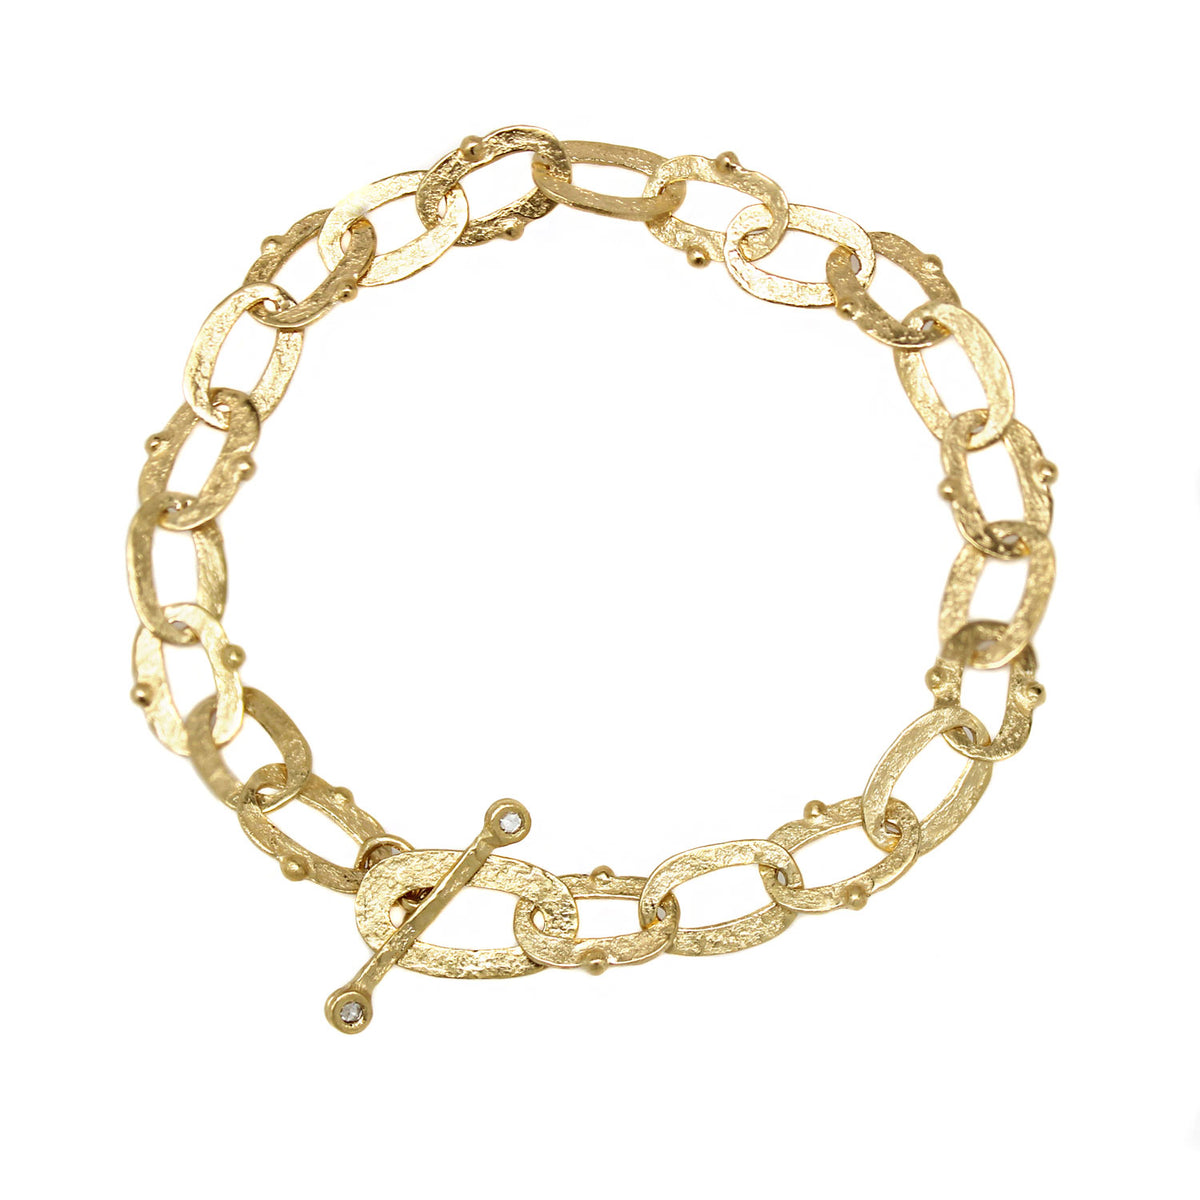 One-of-a-Kind Dotted Chain Bracelet with Diamond Toggle